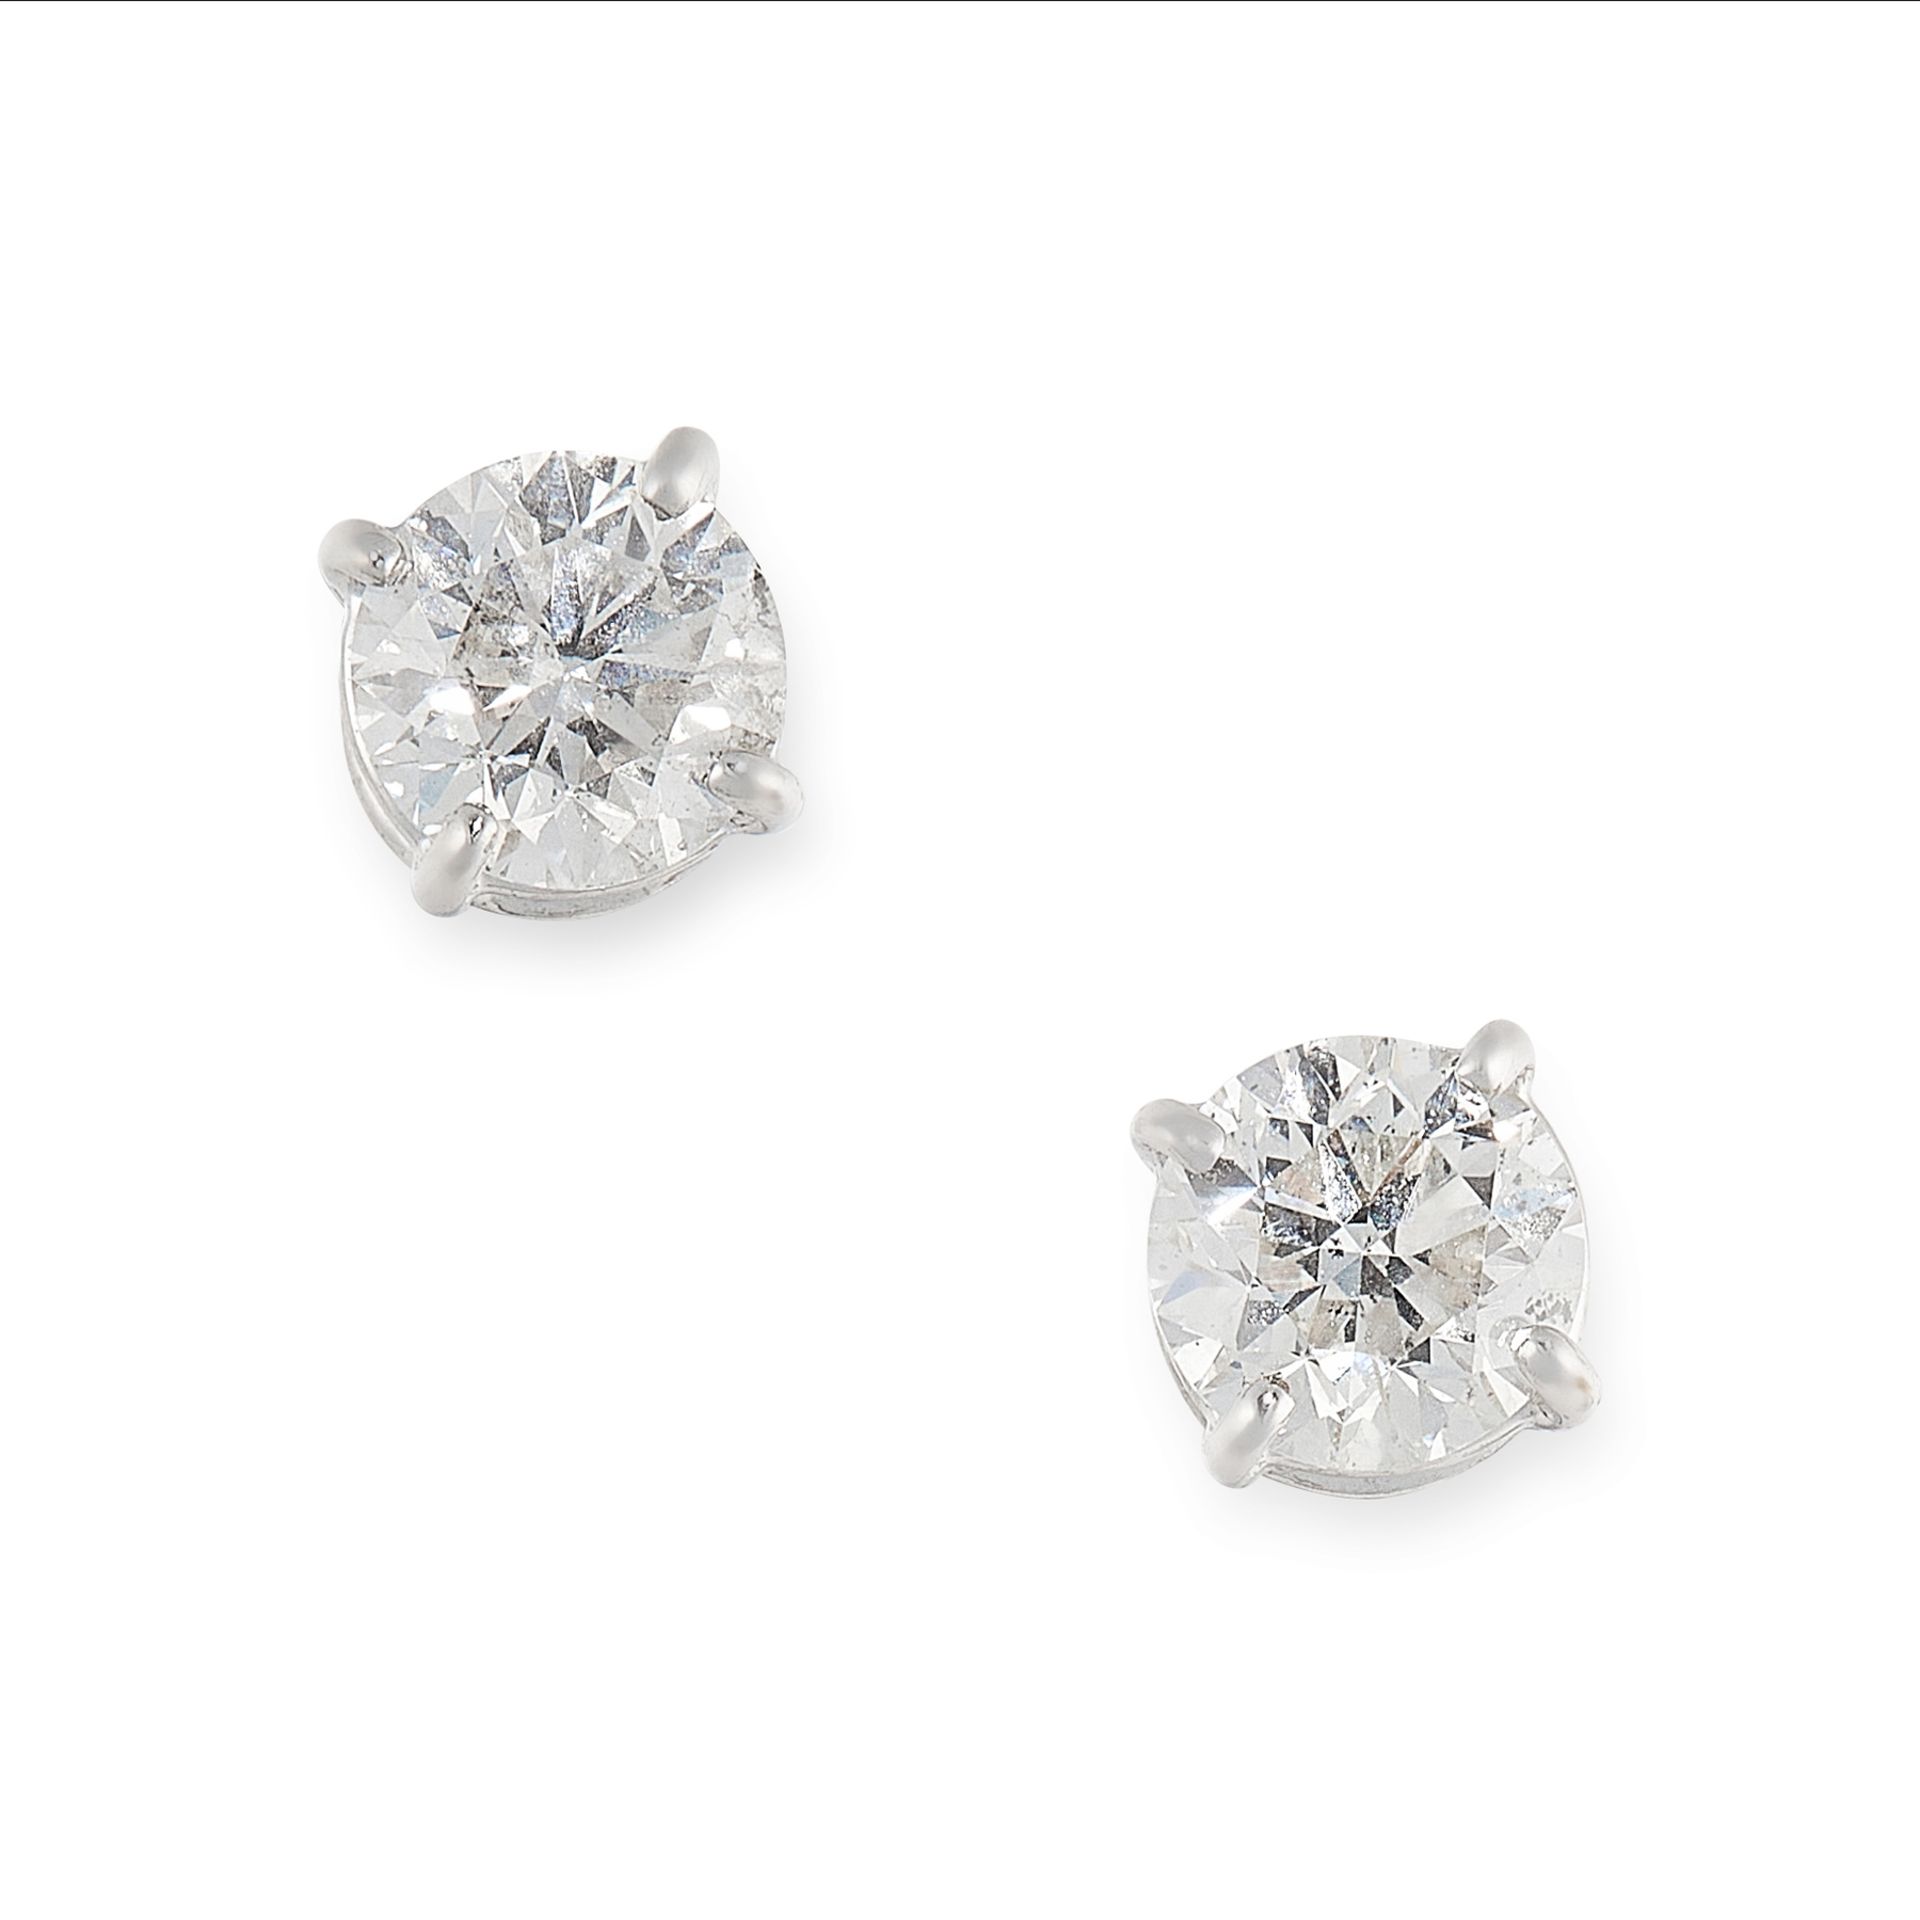 A PAIR OF DIAMOND STUD EARRINGS in 18ct white gold, set with round cut diamonds totalling 0.60